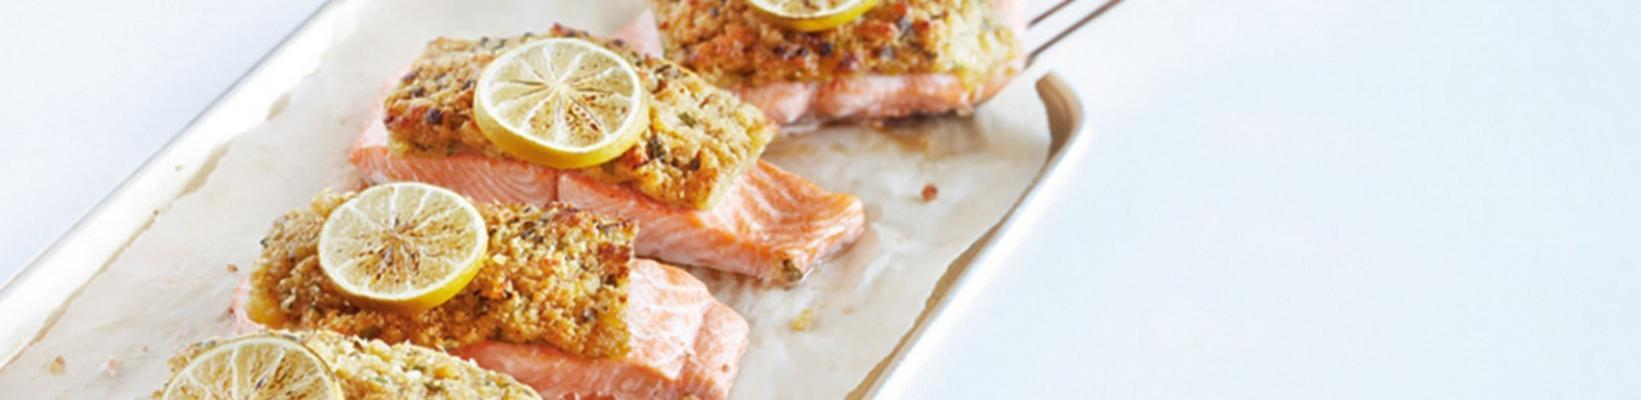 salmon with chive-mustard panade